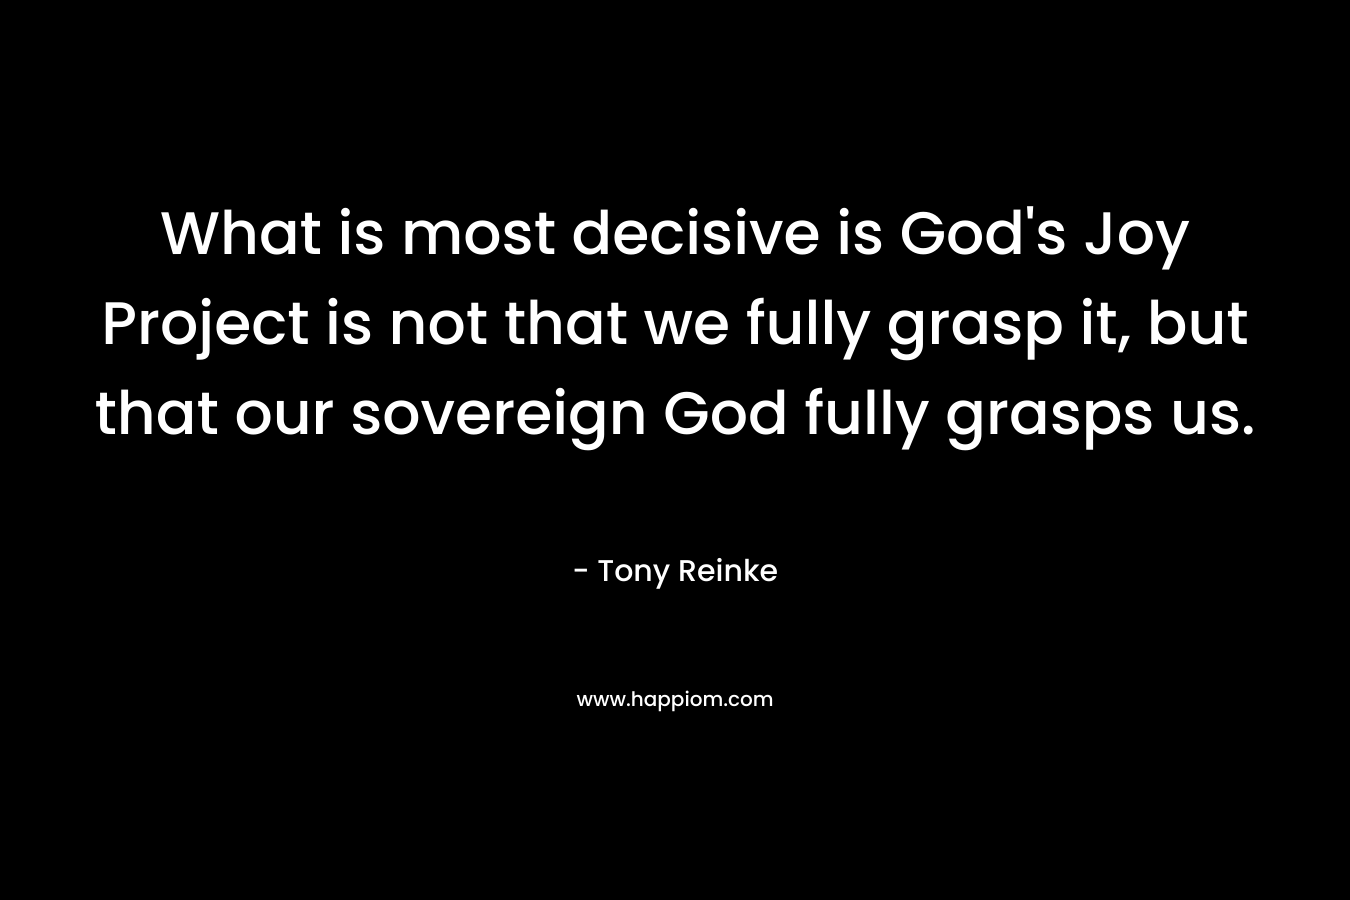 What is most decisive is God's Joy Project is not that we fully grasp it, but that our sovereign God fully grasps us.